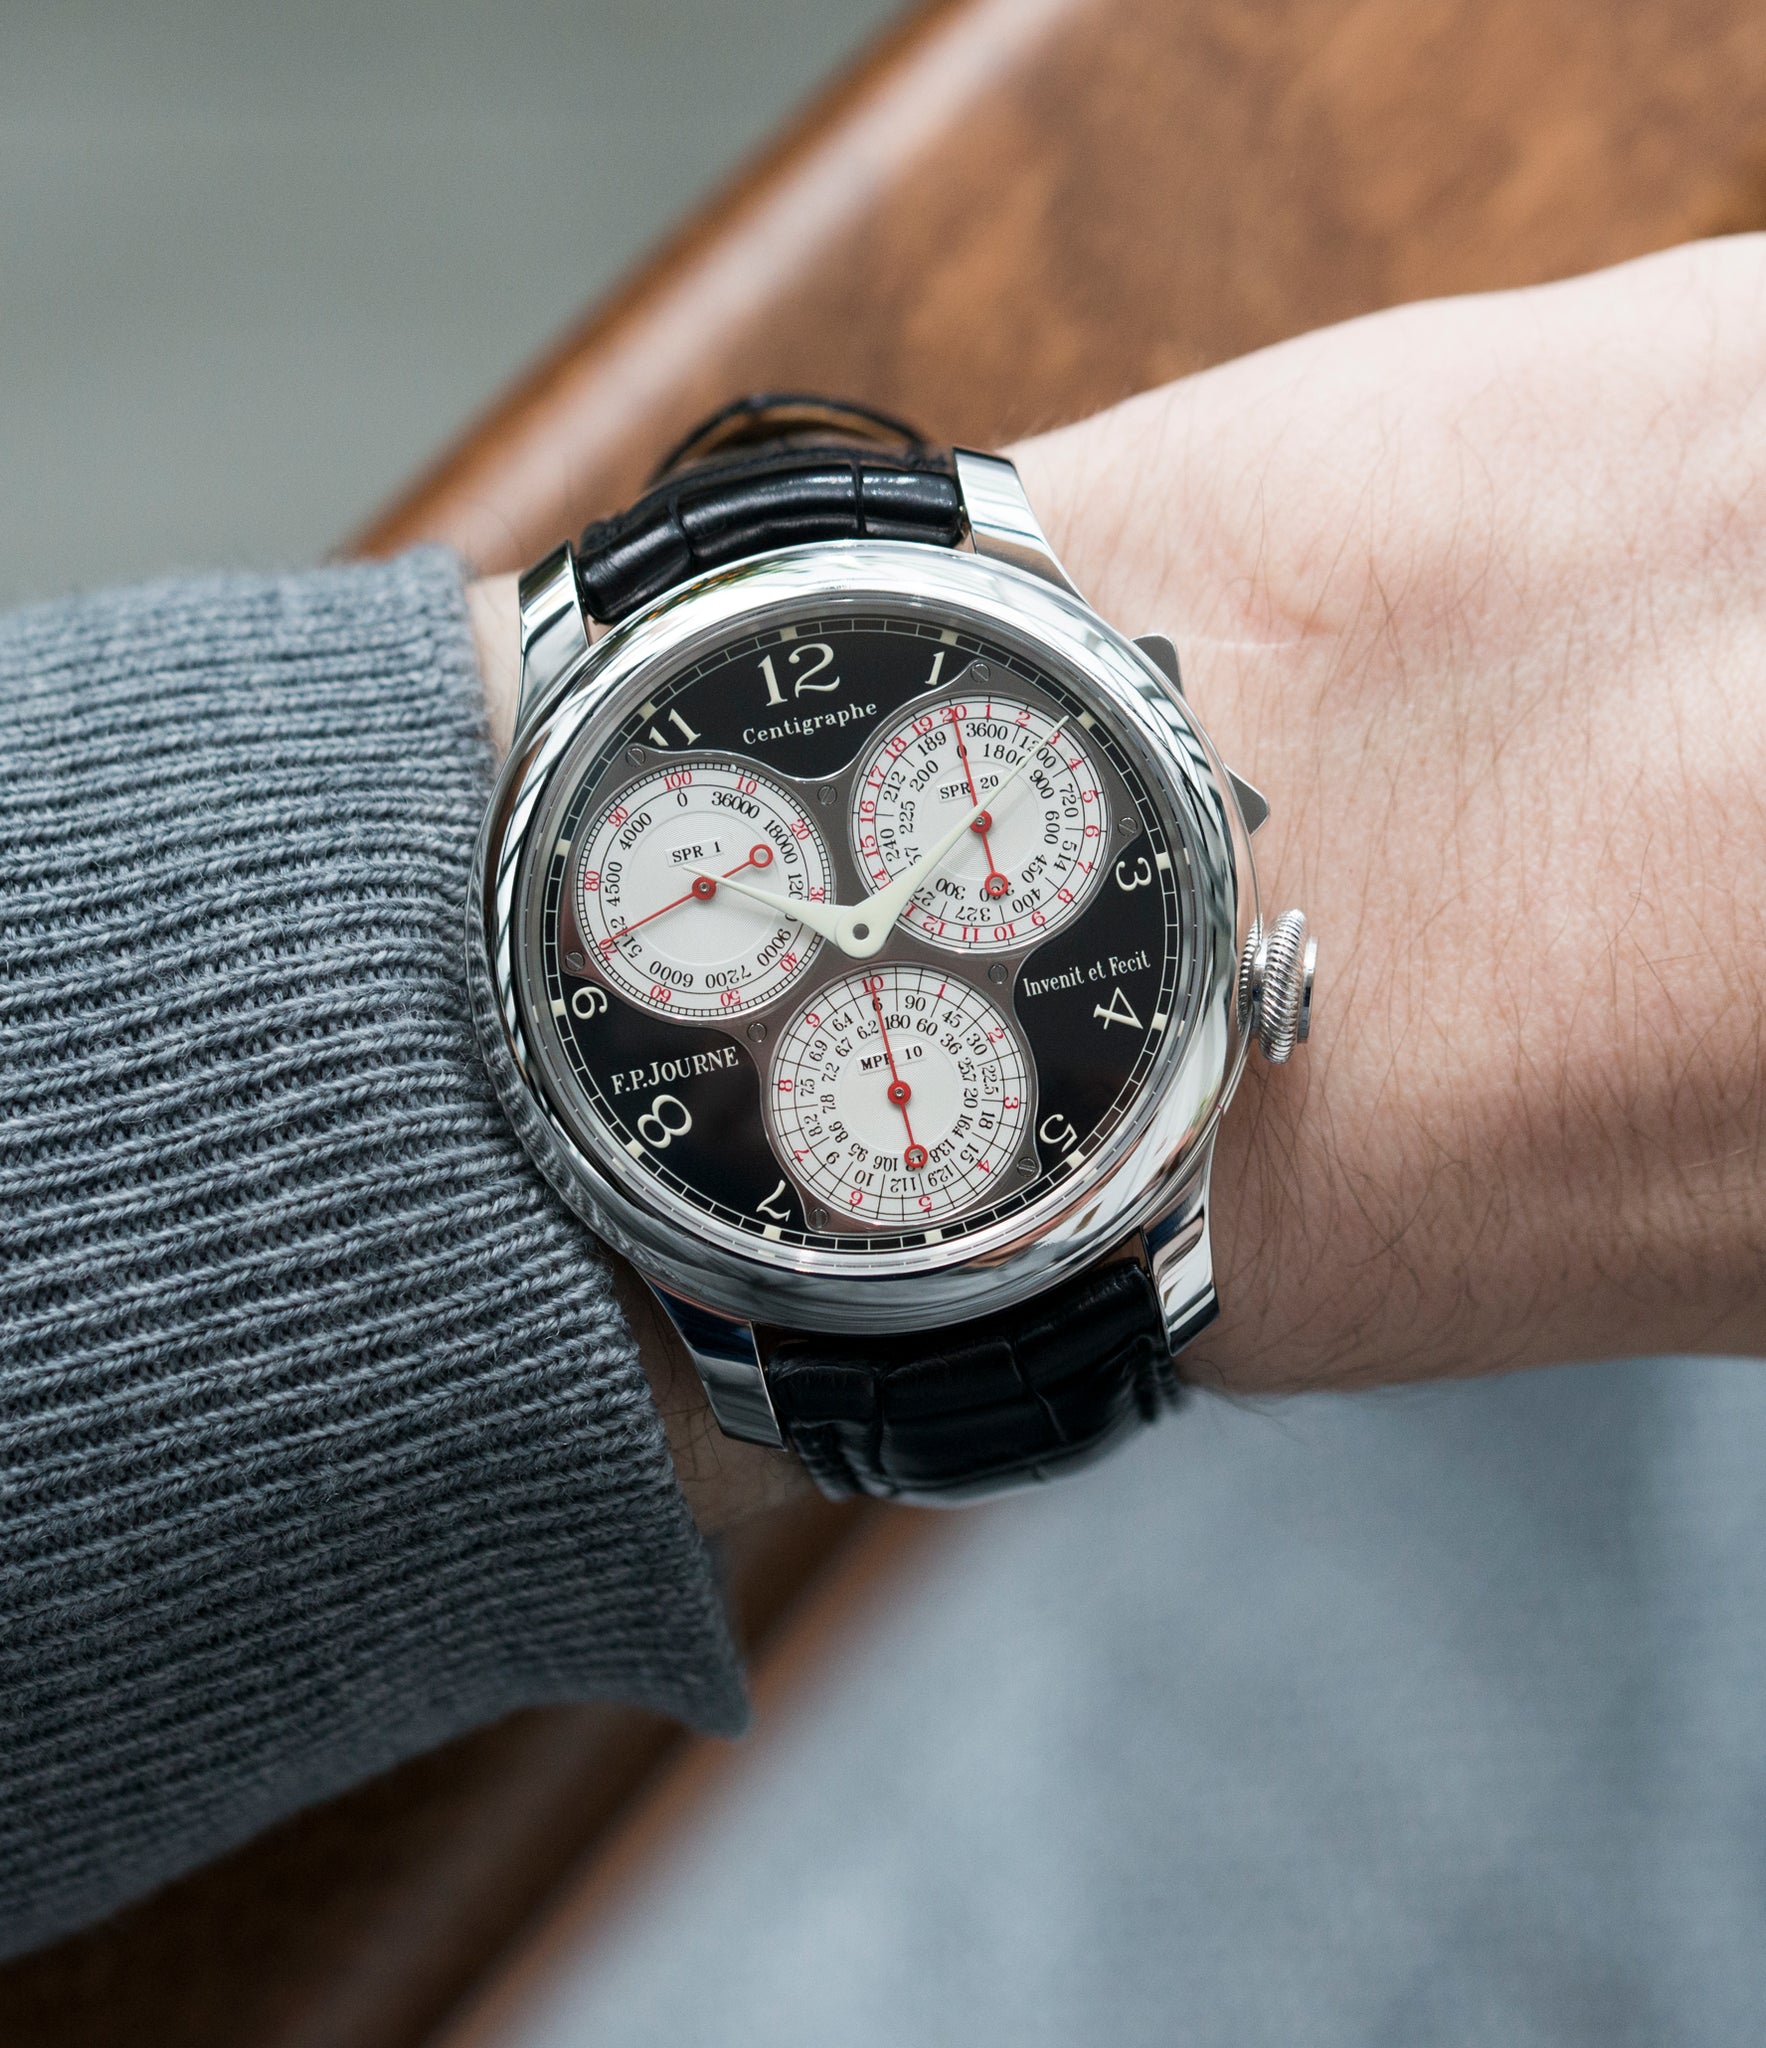 on the wrist F. P. Journe Centigraphe Souverain Black Label 40 mm platinum pre-owned rare watch for sale online at A Collected Man London approved retailer of independent watchmakers